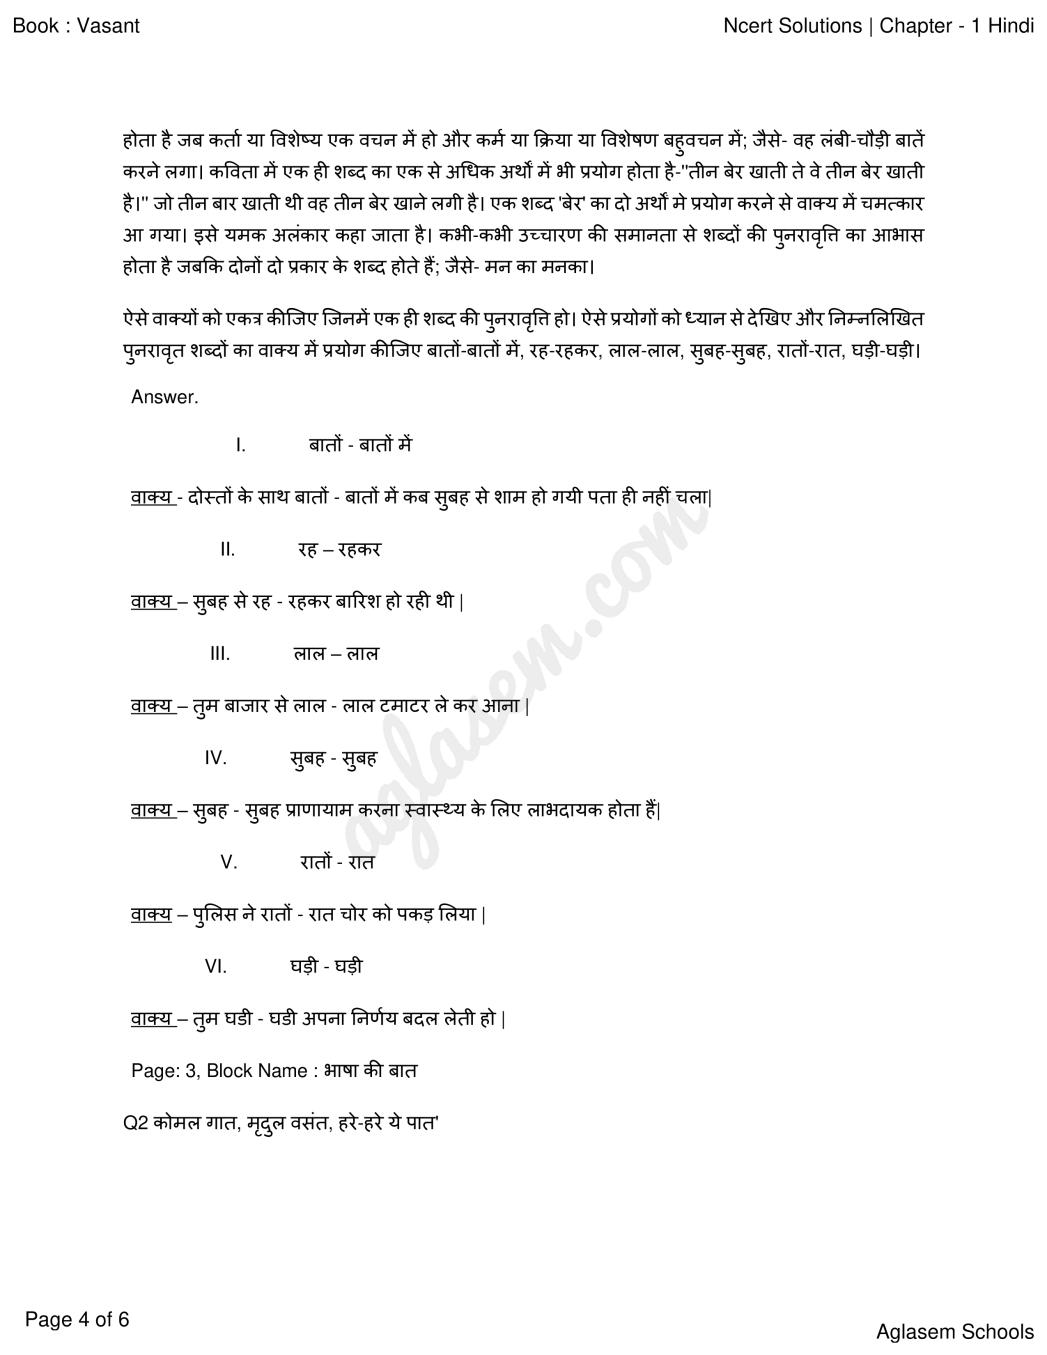 ncert-solutions-for-class-8-hindi-chapter-pdf